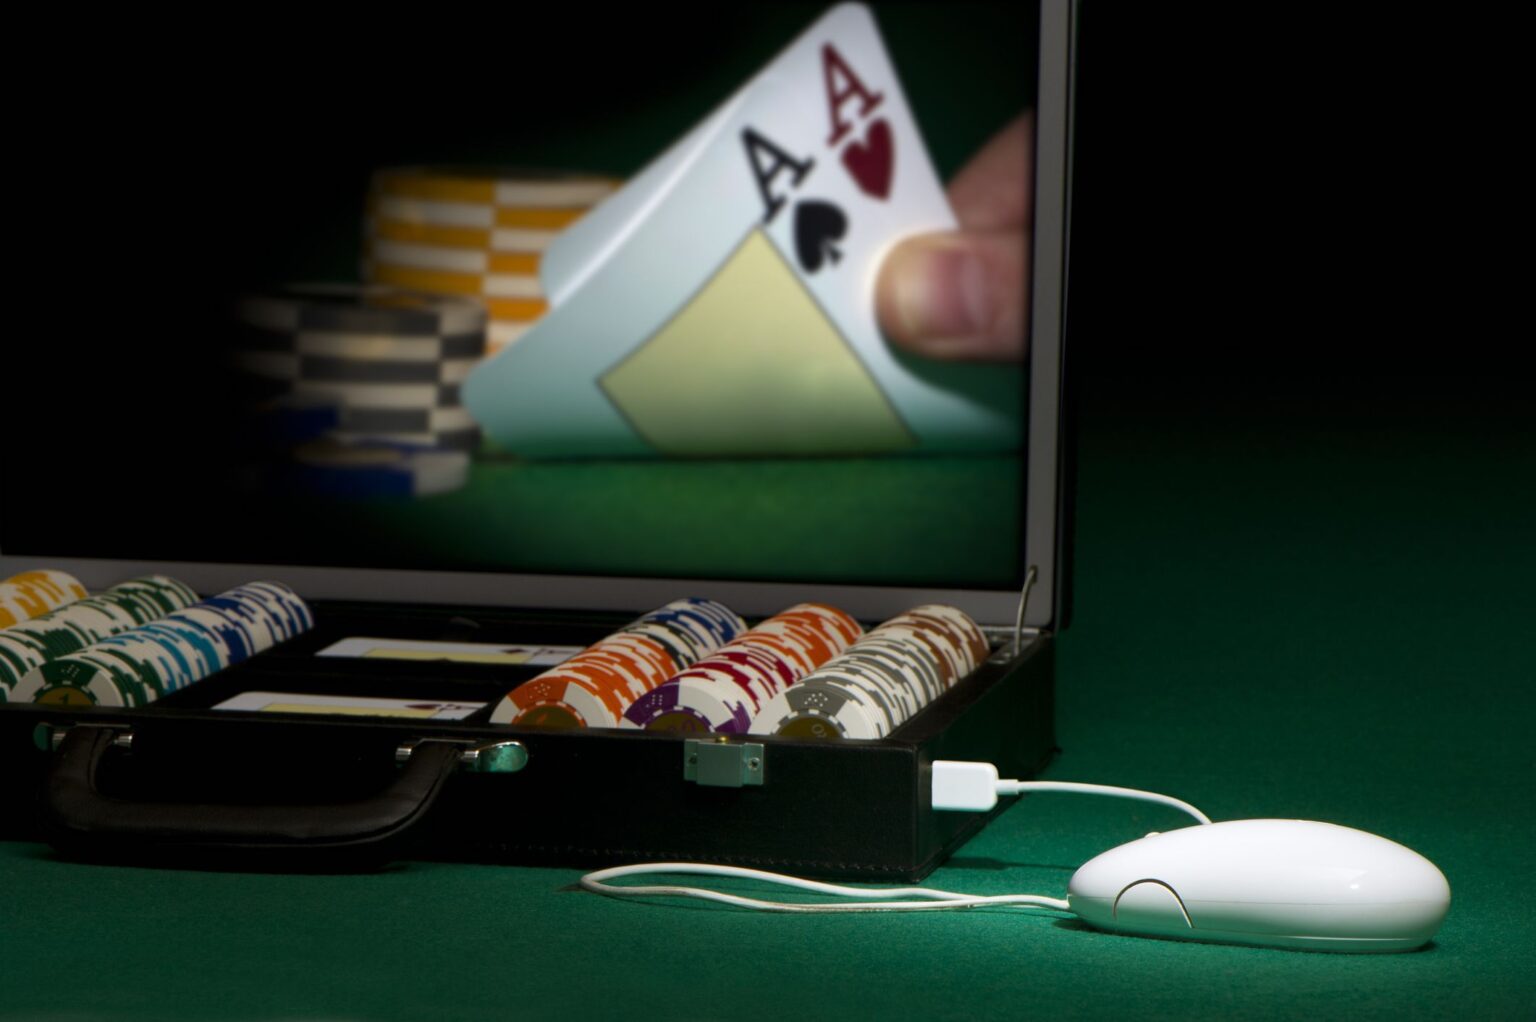 Online casino gaming has become an increasingly popular leisure activity. How has it changed over the years?